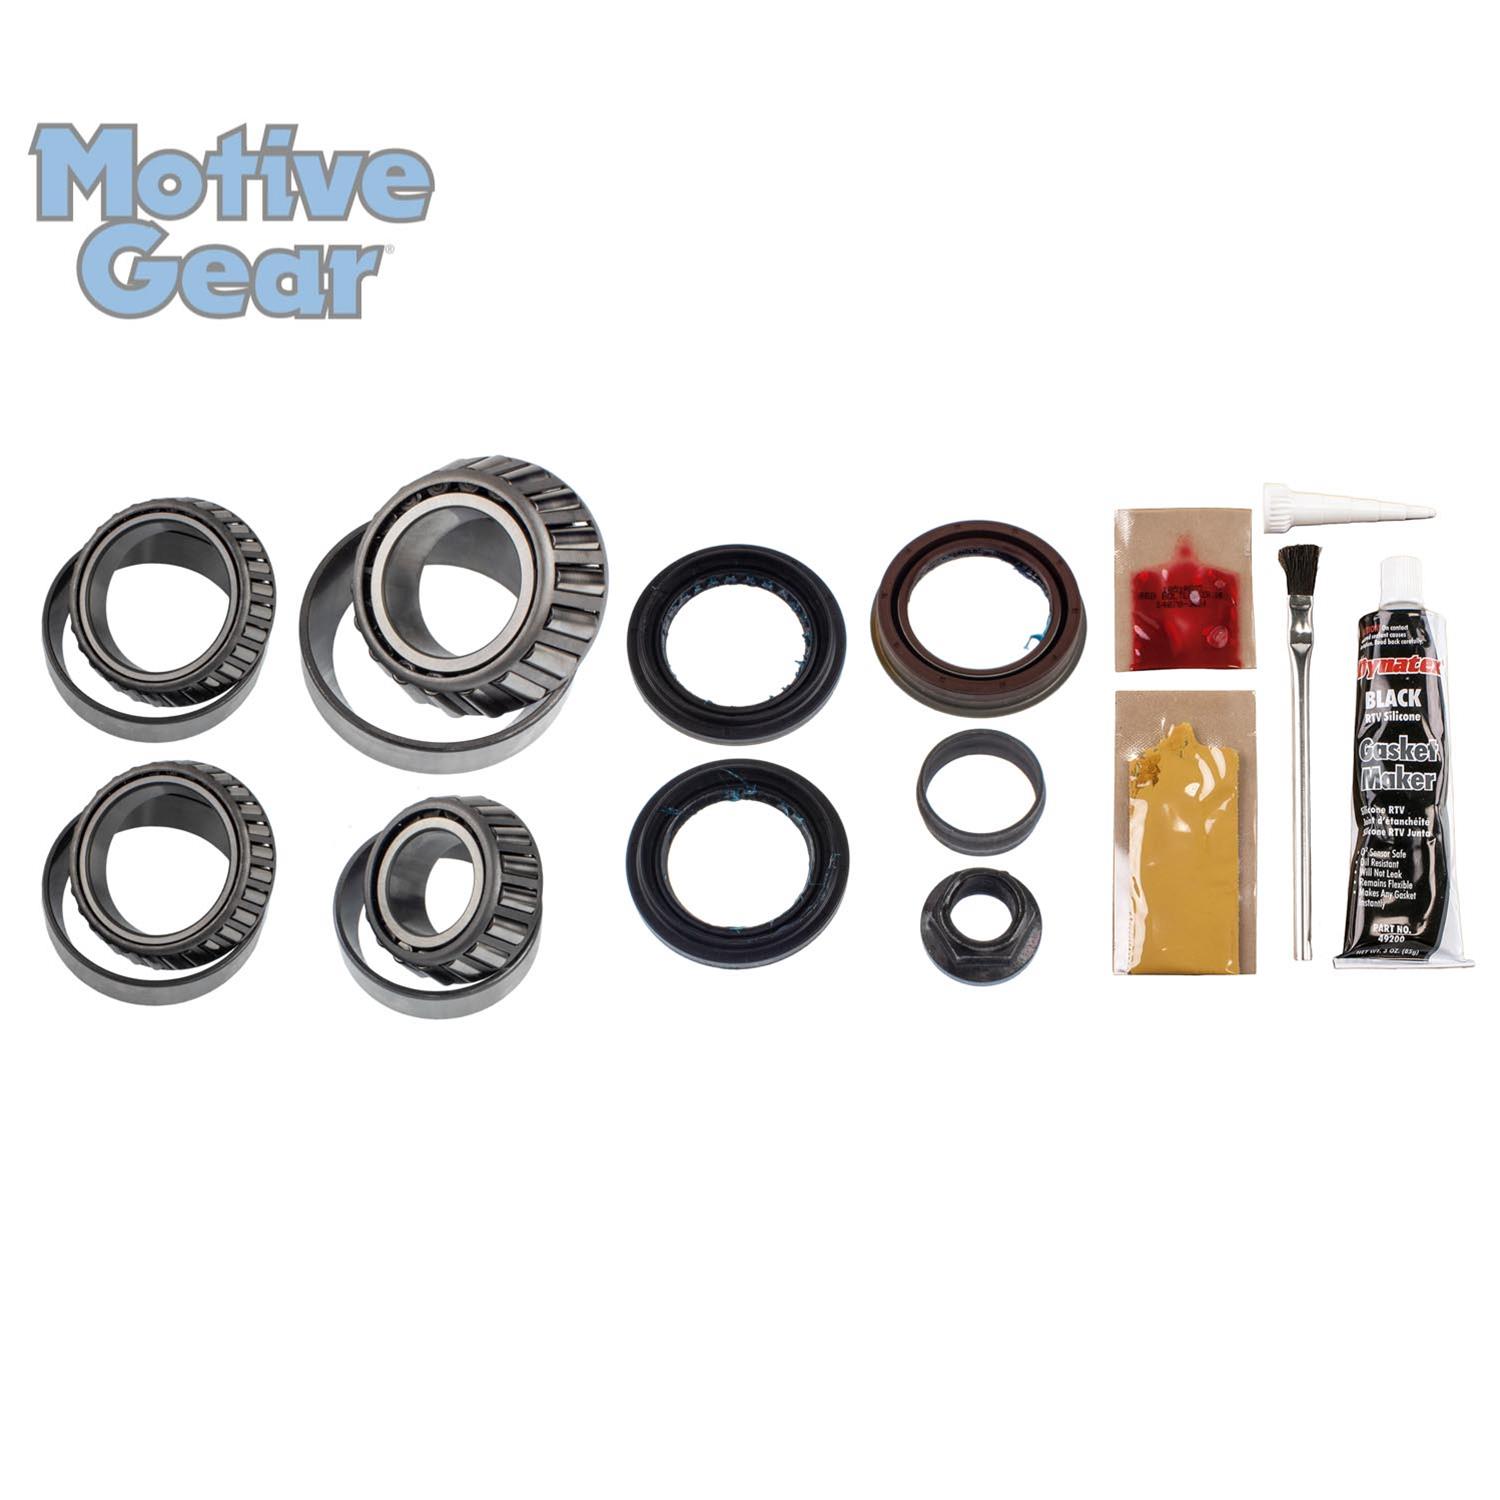 Motive Gear Ring and Pinion Gear Installation Kit - For 2010-2015 Camaro w/8.6" Rear End